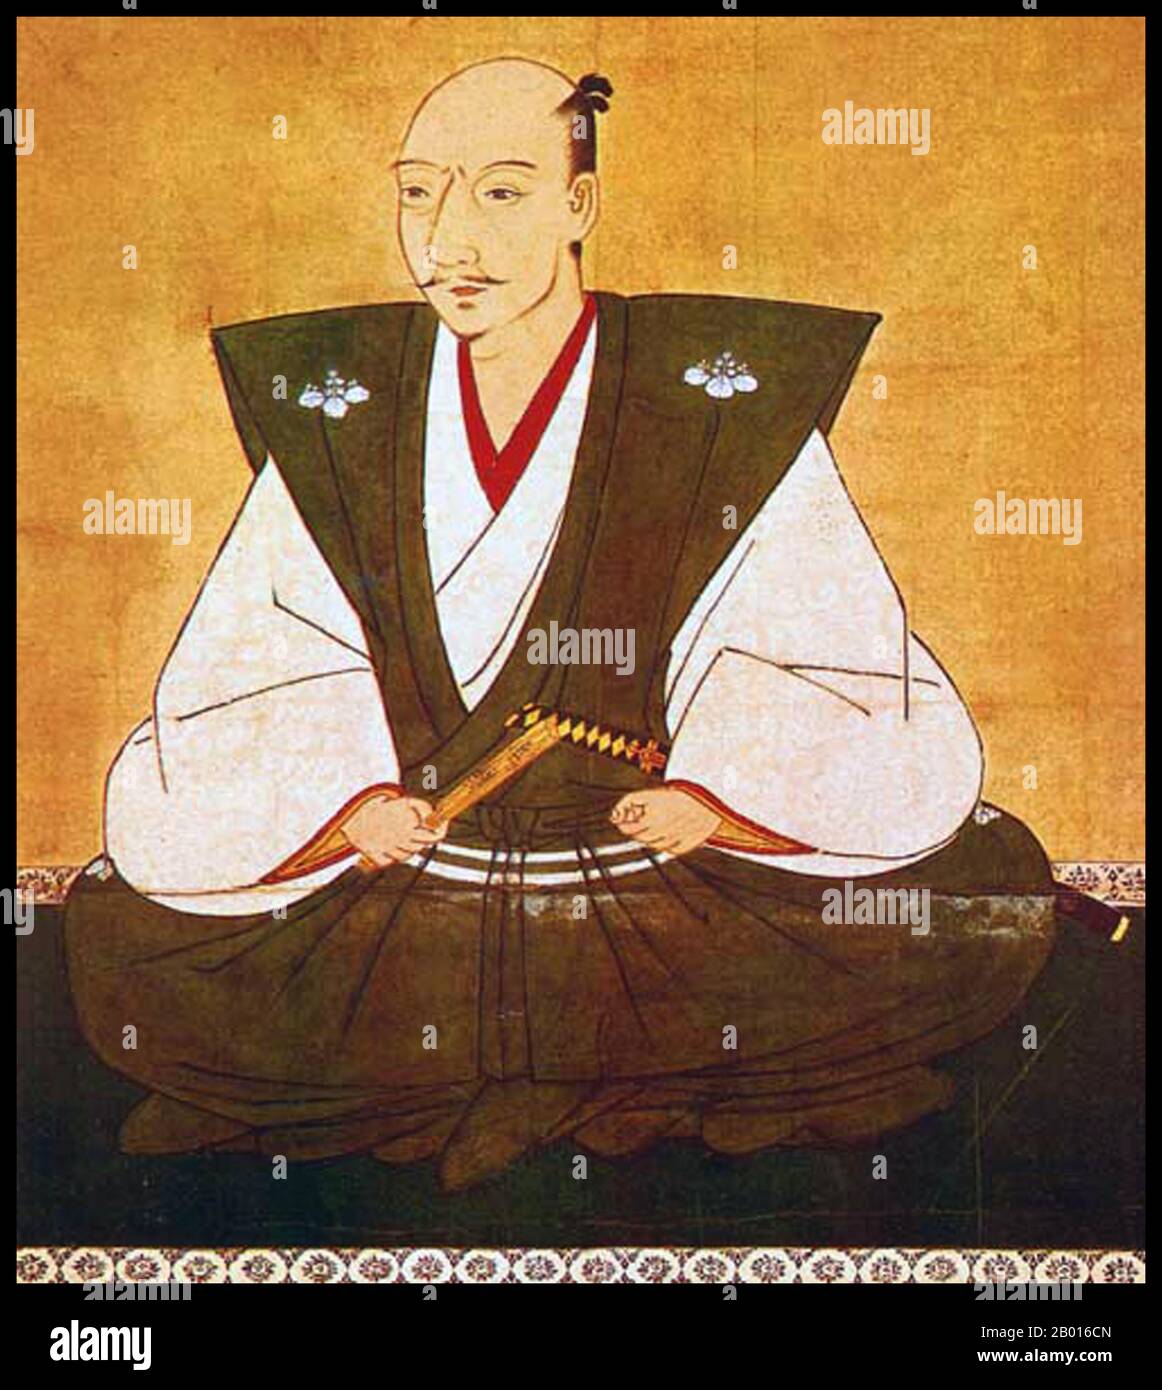 Japan: Oda Nobunaga (23 June 1534 - 21 June 1582), initiator of the unification of Japan in the 16th century. Hanging scroll painting by Munehide Kano (1551-1601), 1583.  Oda Nobunaga was the initiator of the unification of Japan under the rule of the shogun in the late 16th century. He was also a major daimyo during the Sengoku period of Japanese history. He was the second son of Oda Nobuhide, a deputy shugo (military governor) with land holdings in Owari Province.  Nobunaga lived a life of continuous military conquest, eventually conquering a third of Japanese daimyo before his death in 1582 Stock Photo